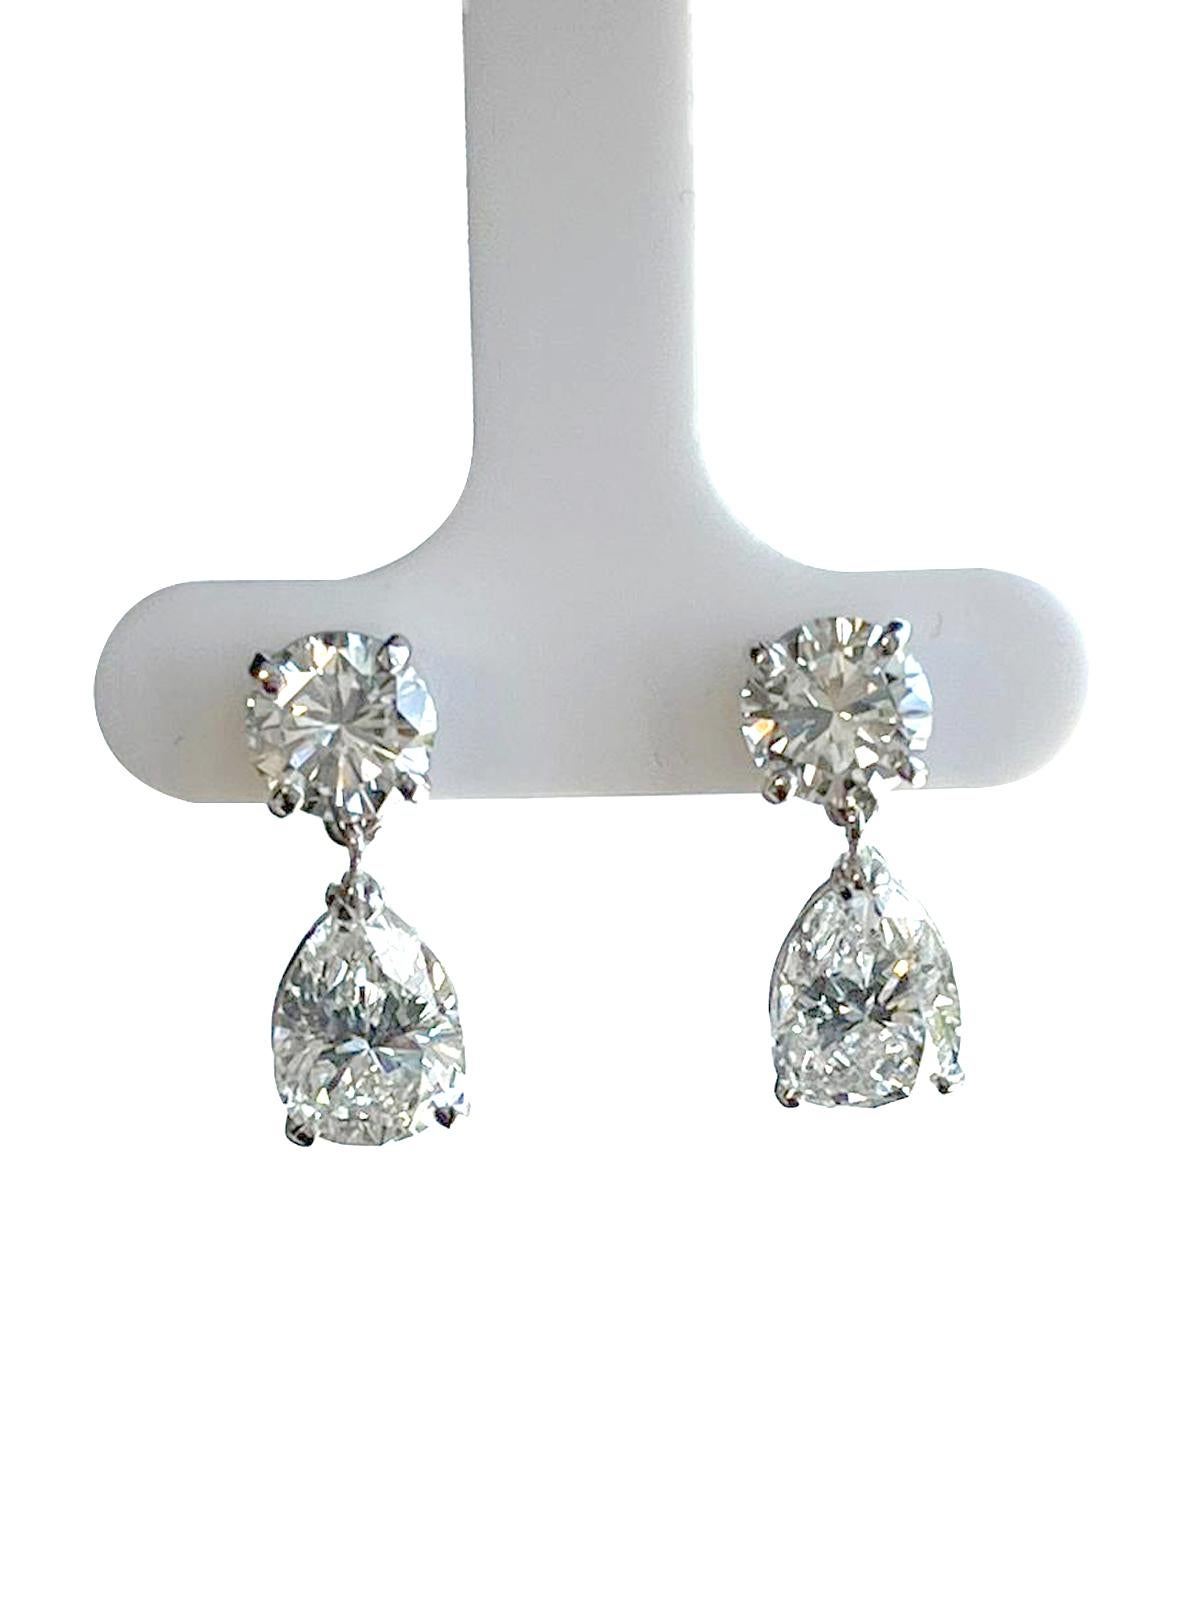 A Stunning Pair of 14K White Gold Pear Shape and Round Diamond Earrings. Each earring has a Pear Shape and Round cut diamond in a classic setting. Each Pear Shape diamond weights 1.92ct / 1.97ct with I / J colors and Si1 Clarity and Round diamond